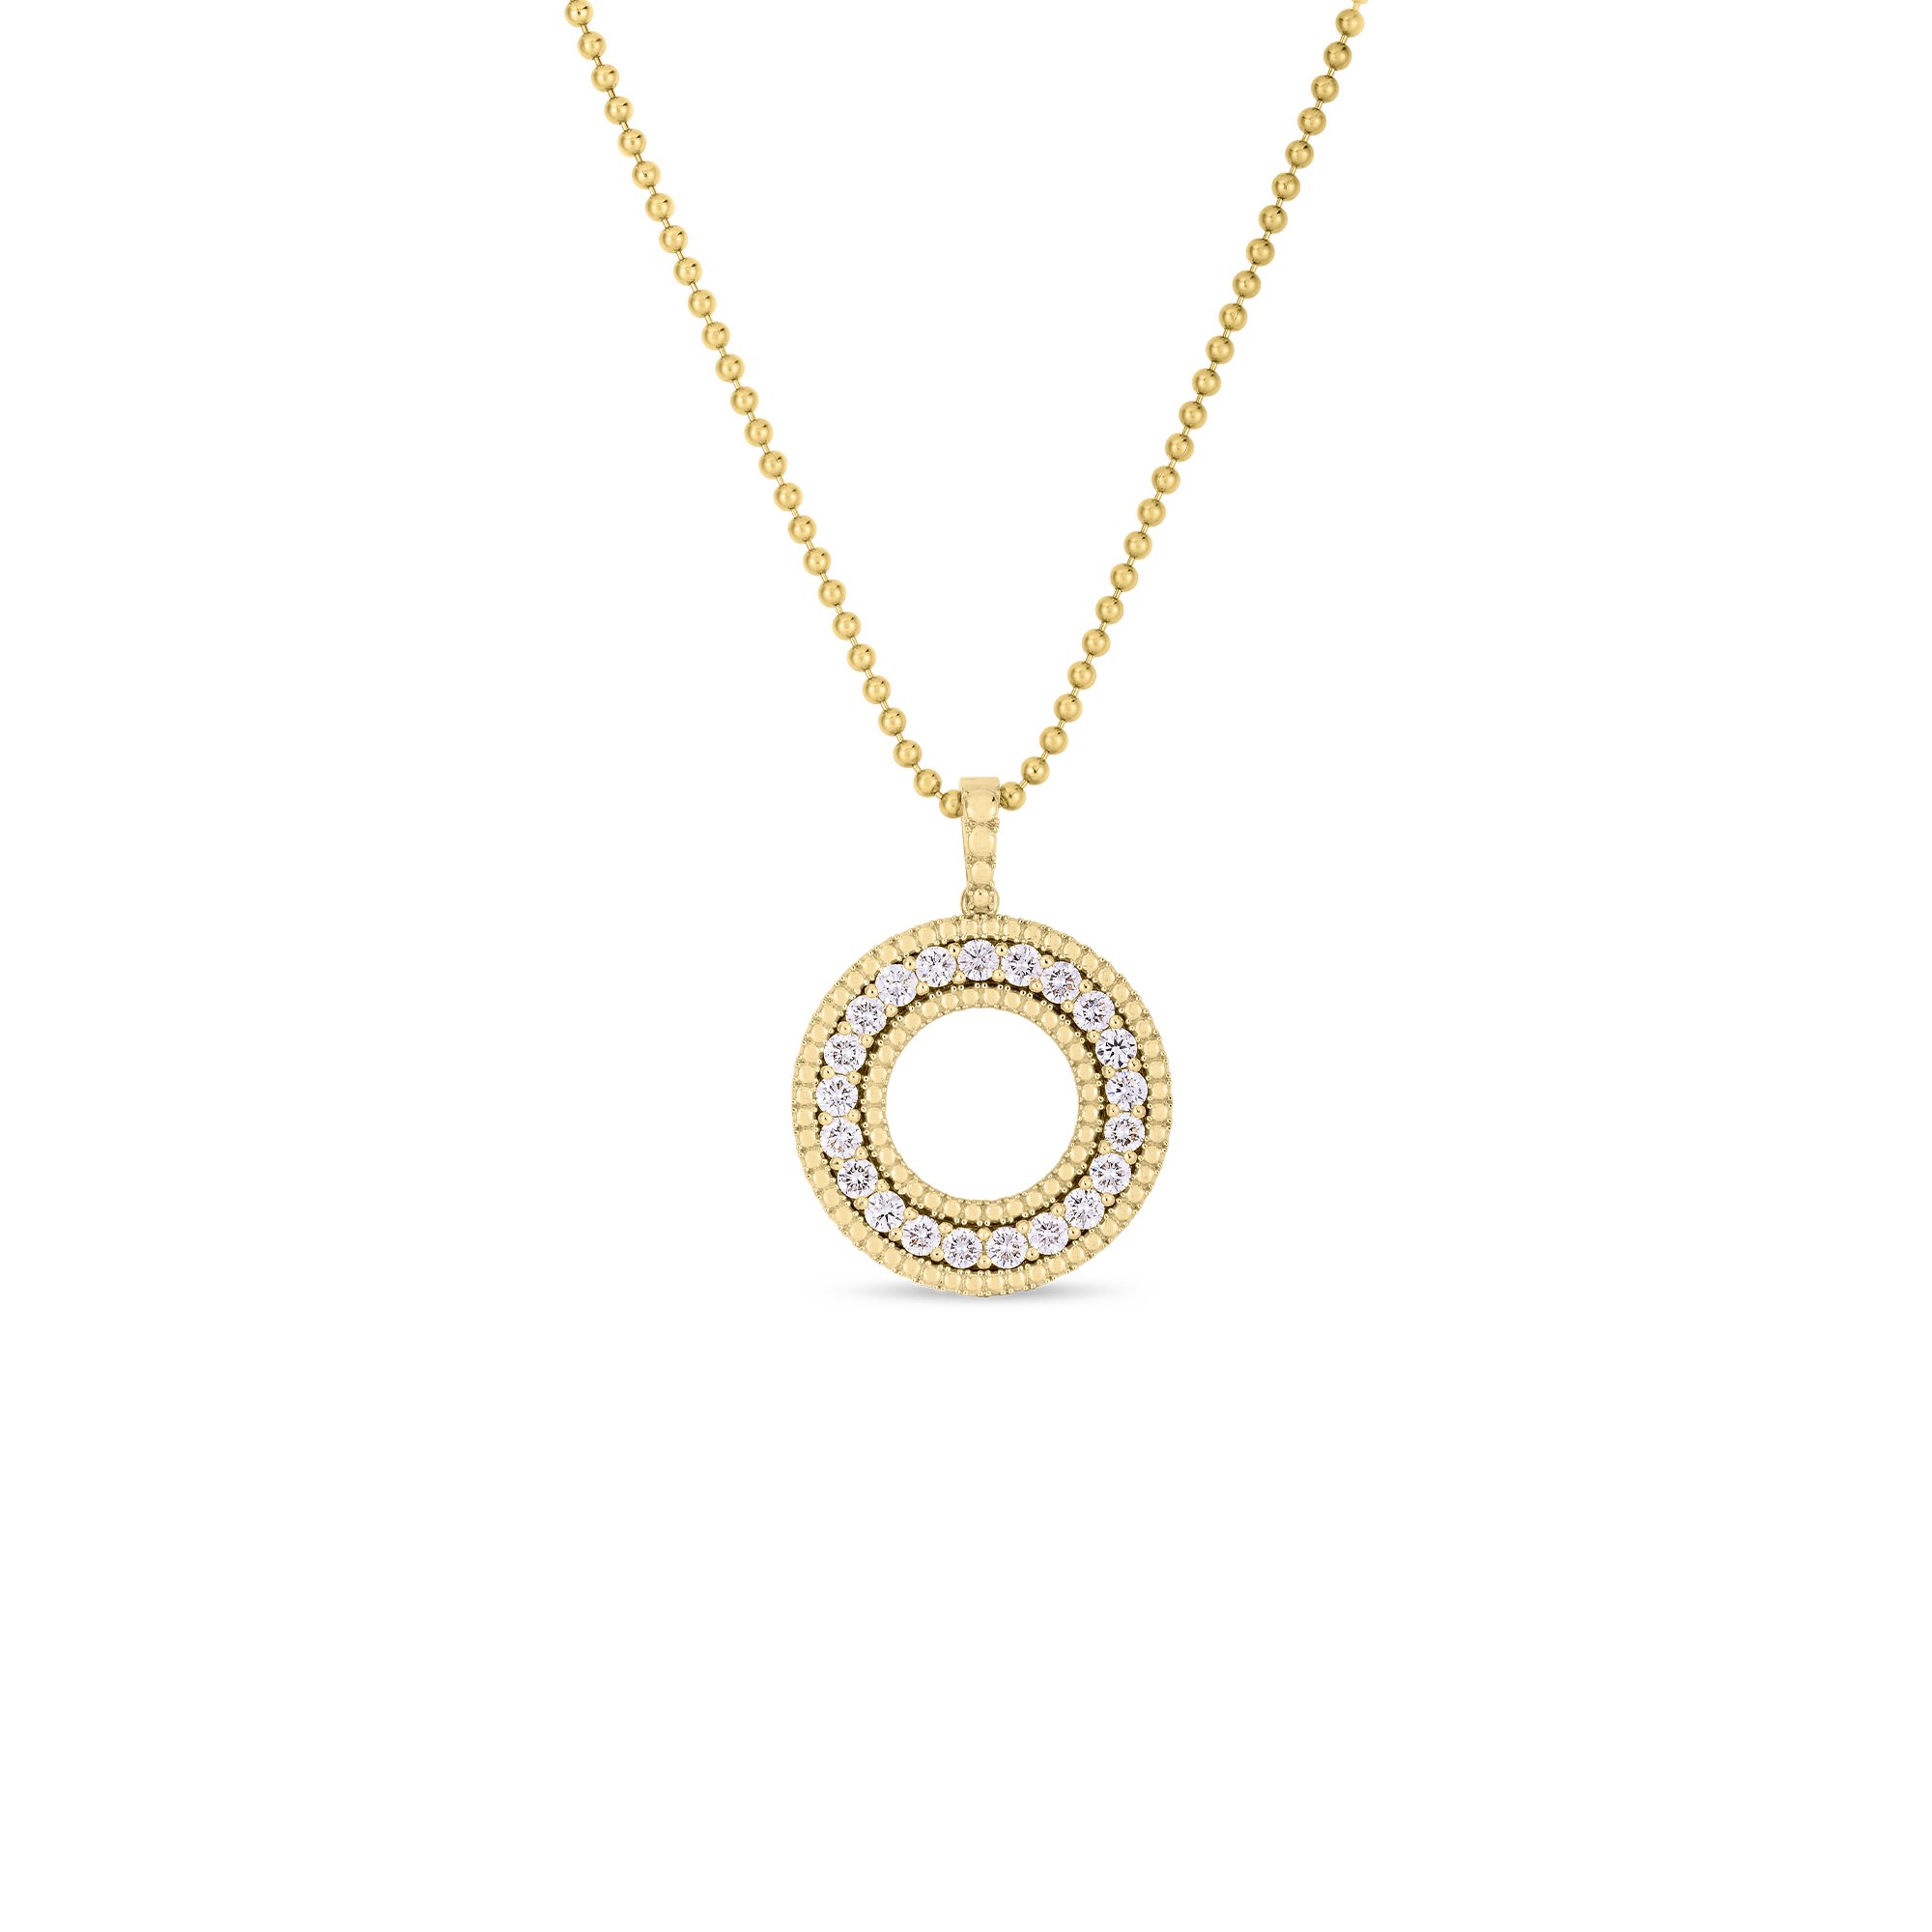 Siena Large Diamond Circle Necklace with Diamonds in 18kt Yellow Gold